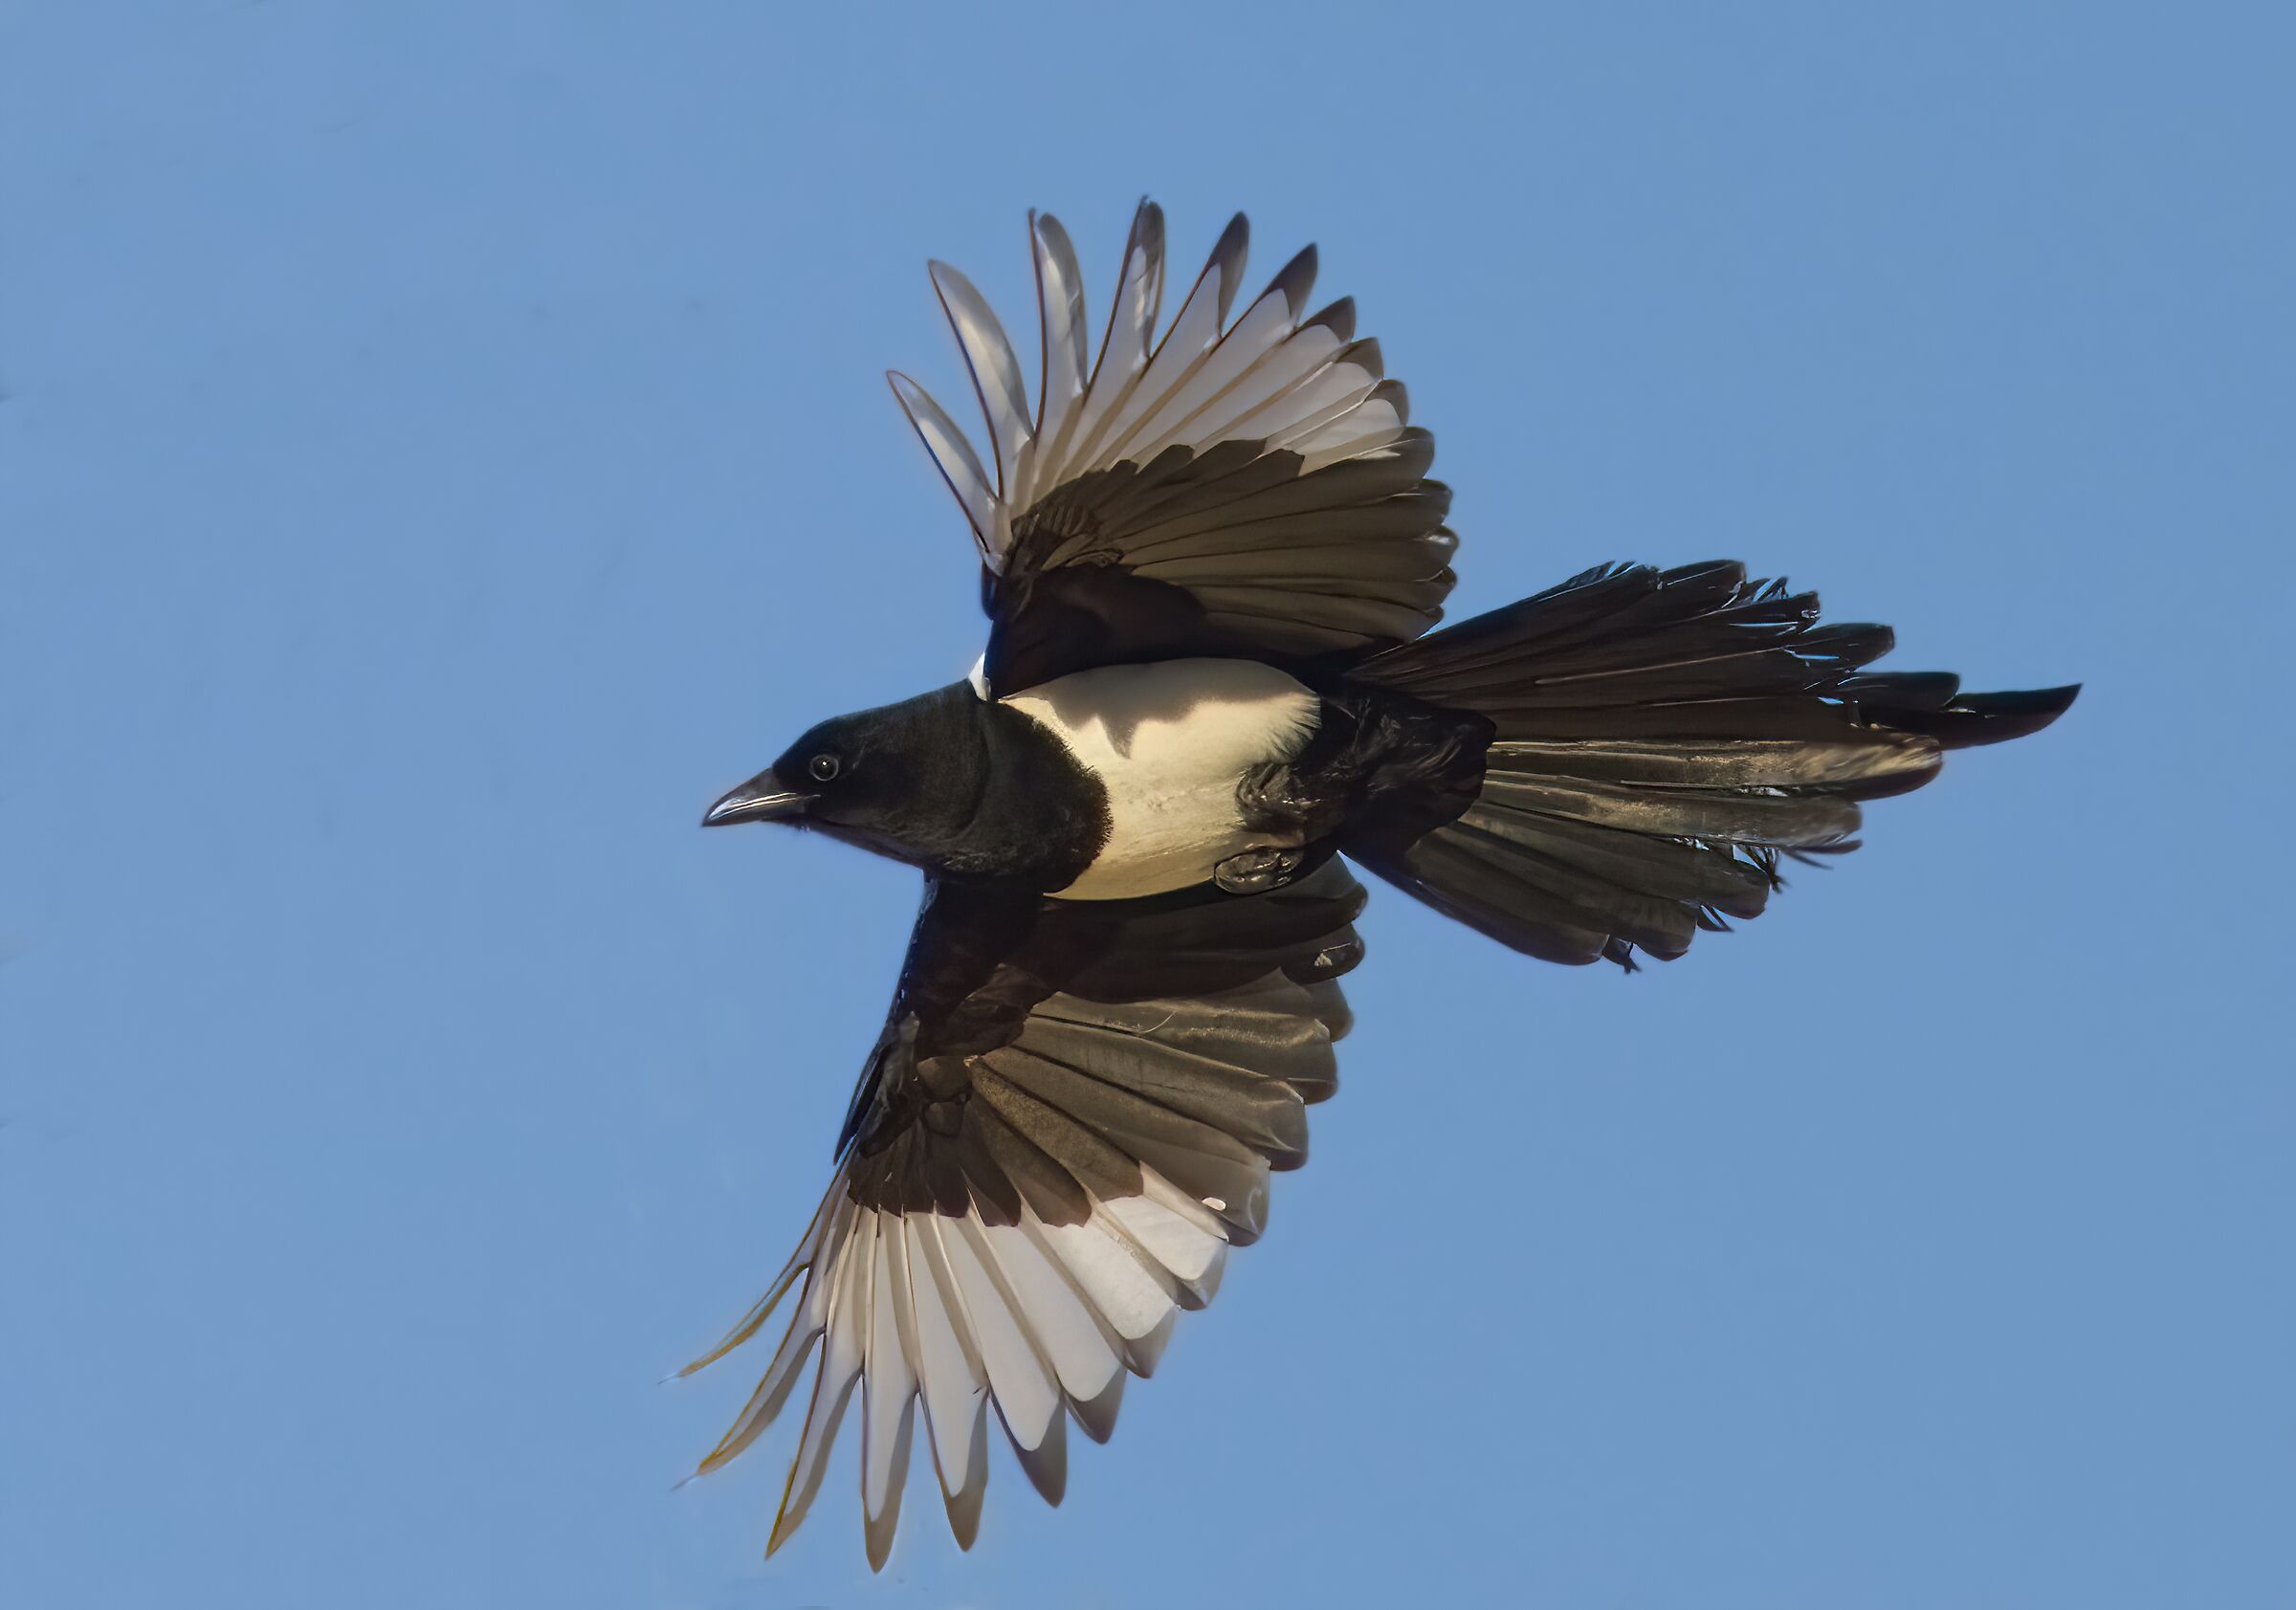 The Flight of the Magpie...